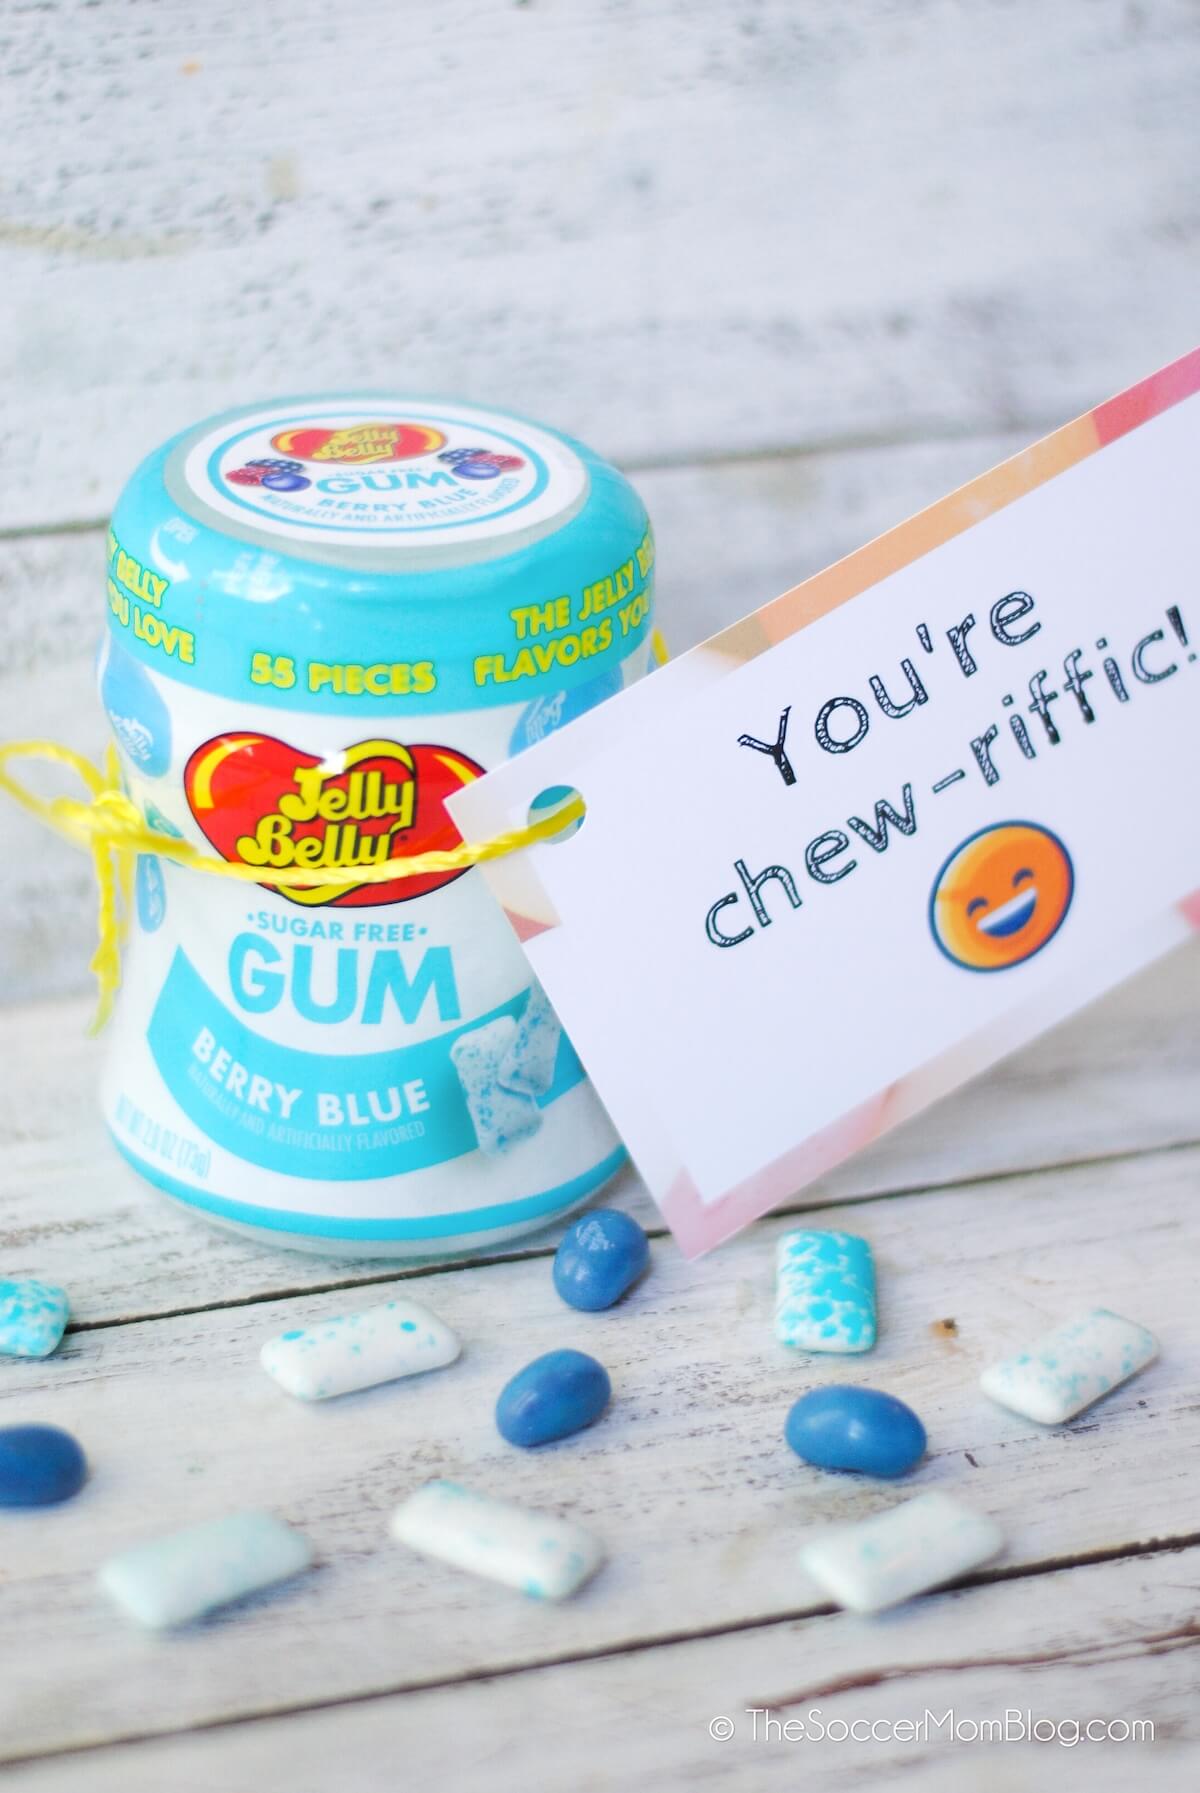 Jelly Belly Gum Berry Blue flavor and printable gift tag